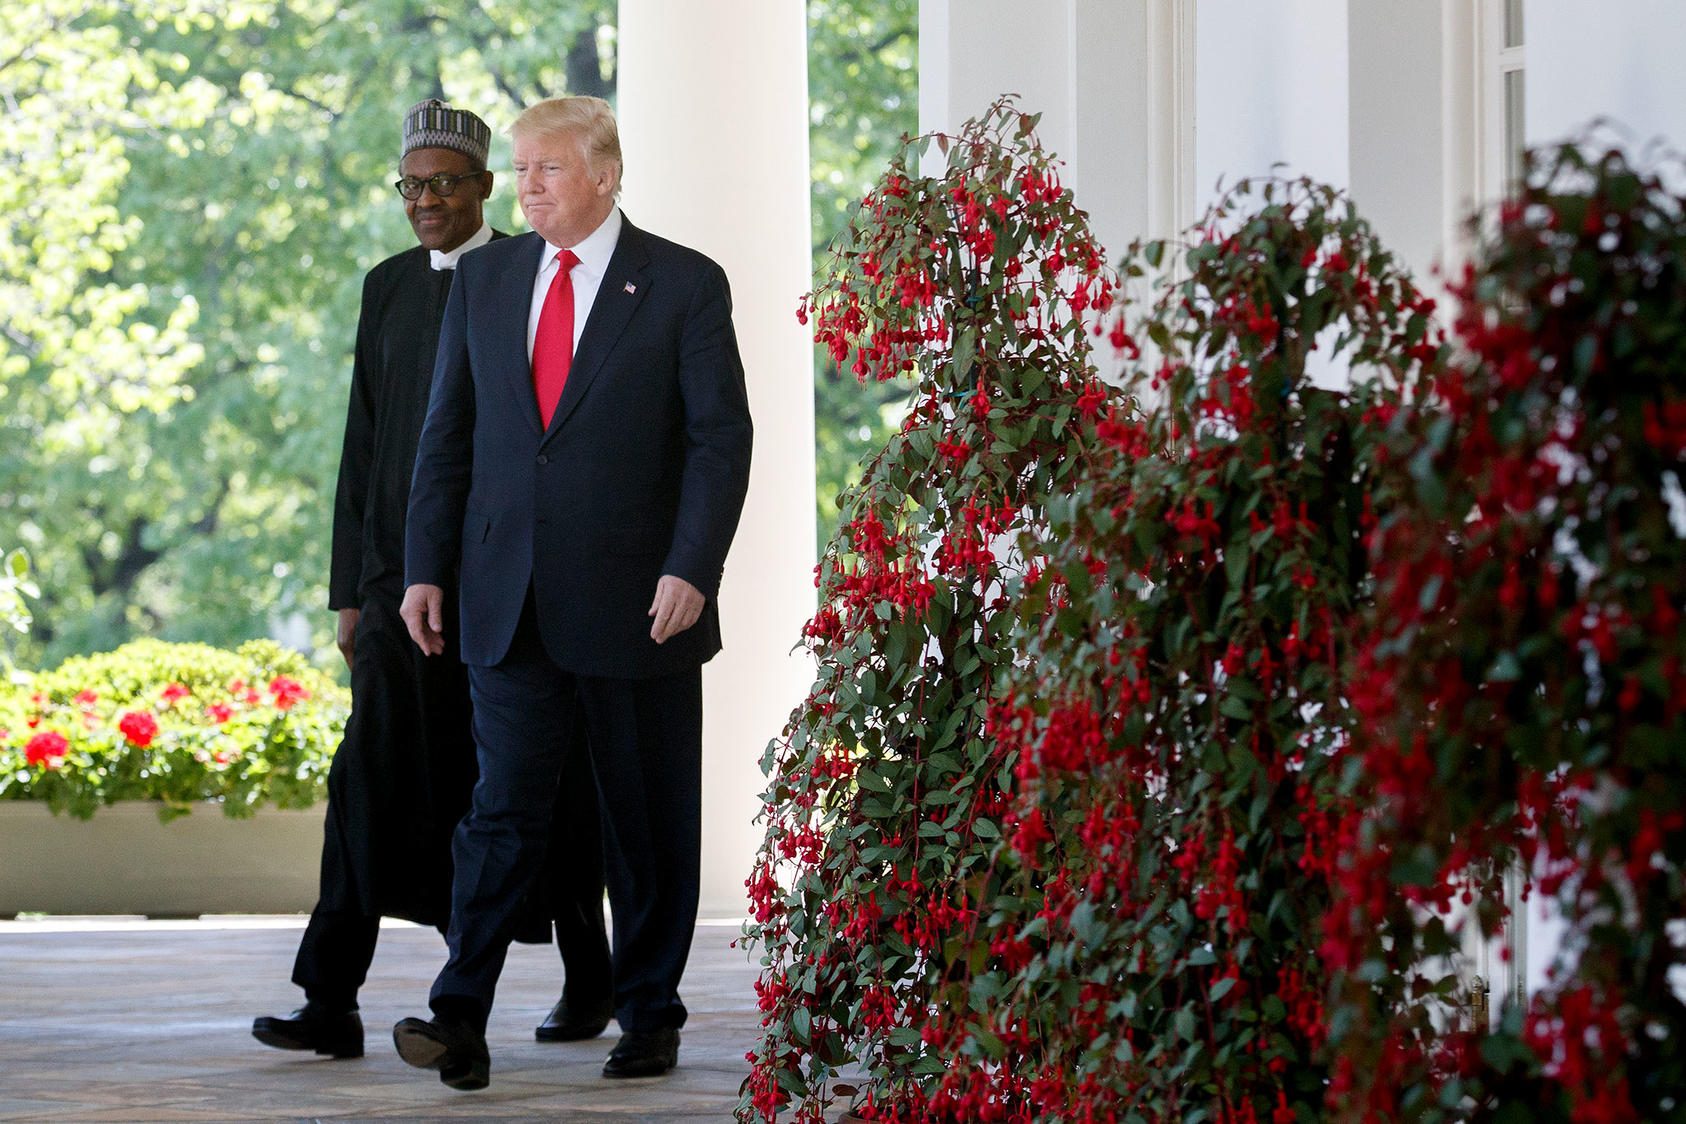 President Donald Trump and Nigerian President Muhammadu Buhari in the Rose Garden at the White House, where they held a joint news conference, in Washington, April 30, 2018. (Tom Brenner/The New York Times)